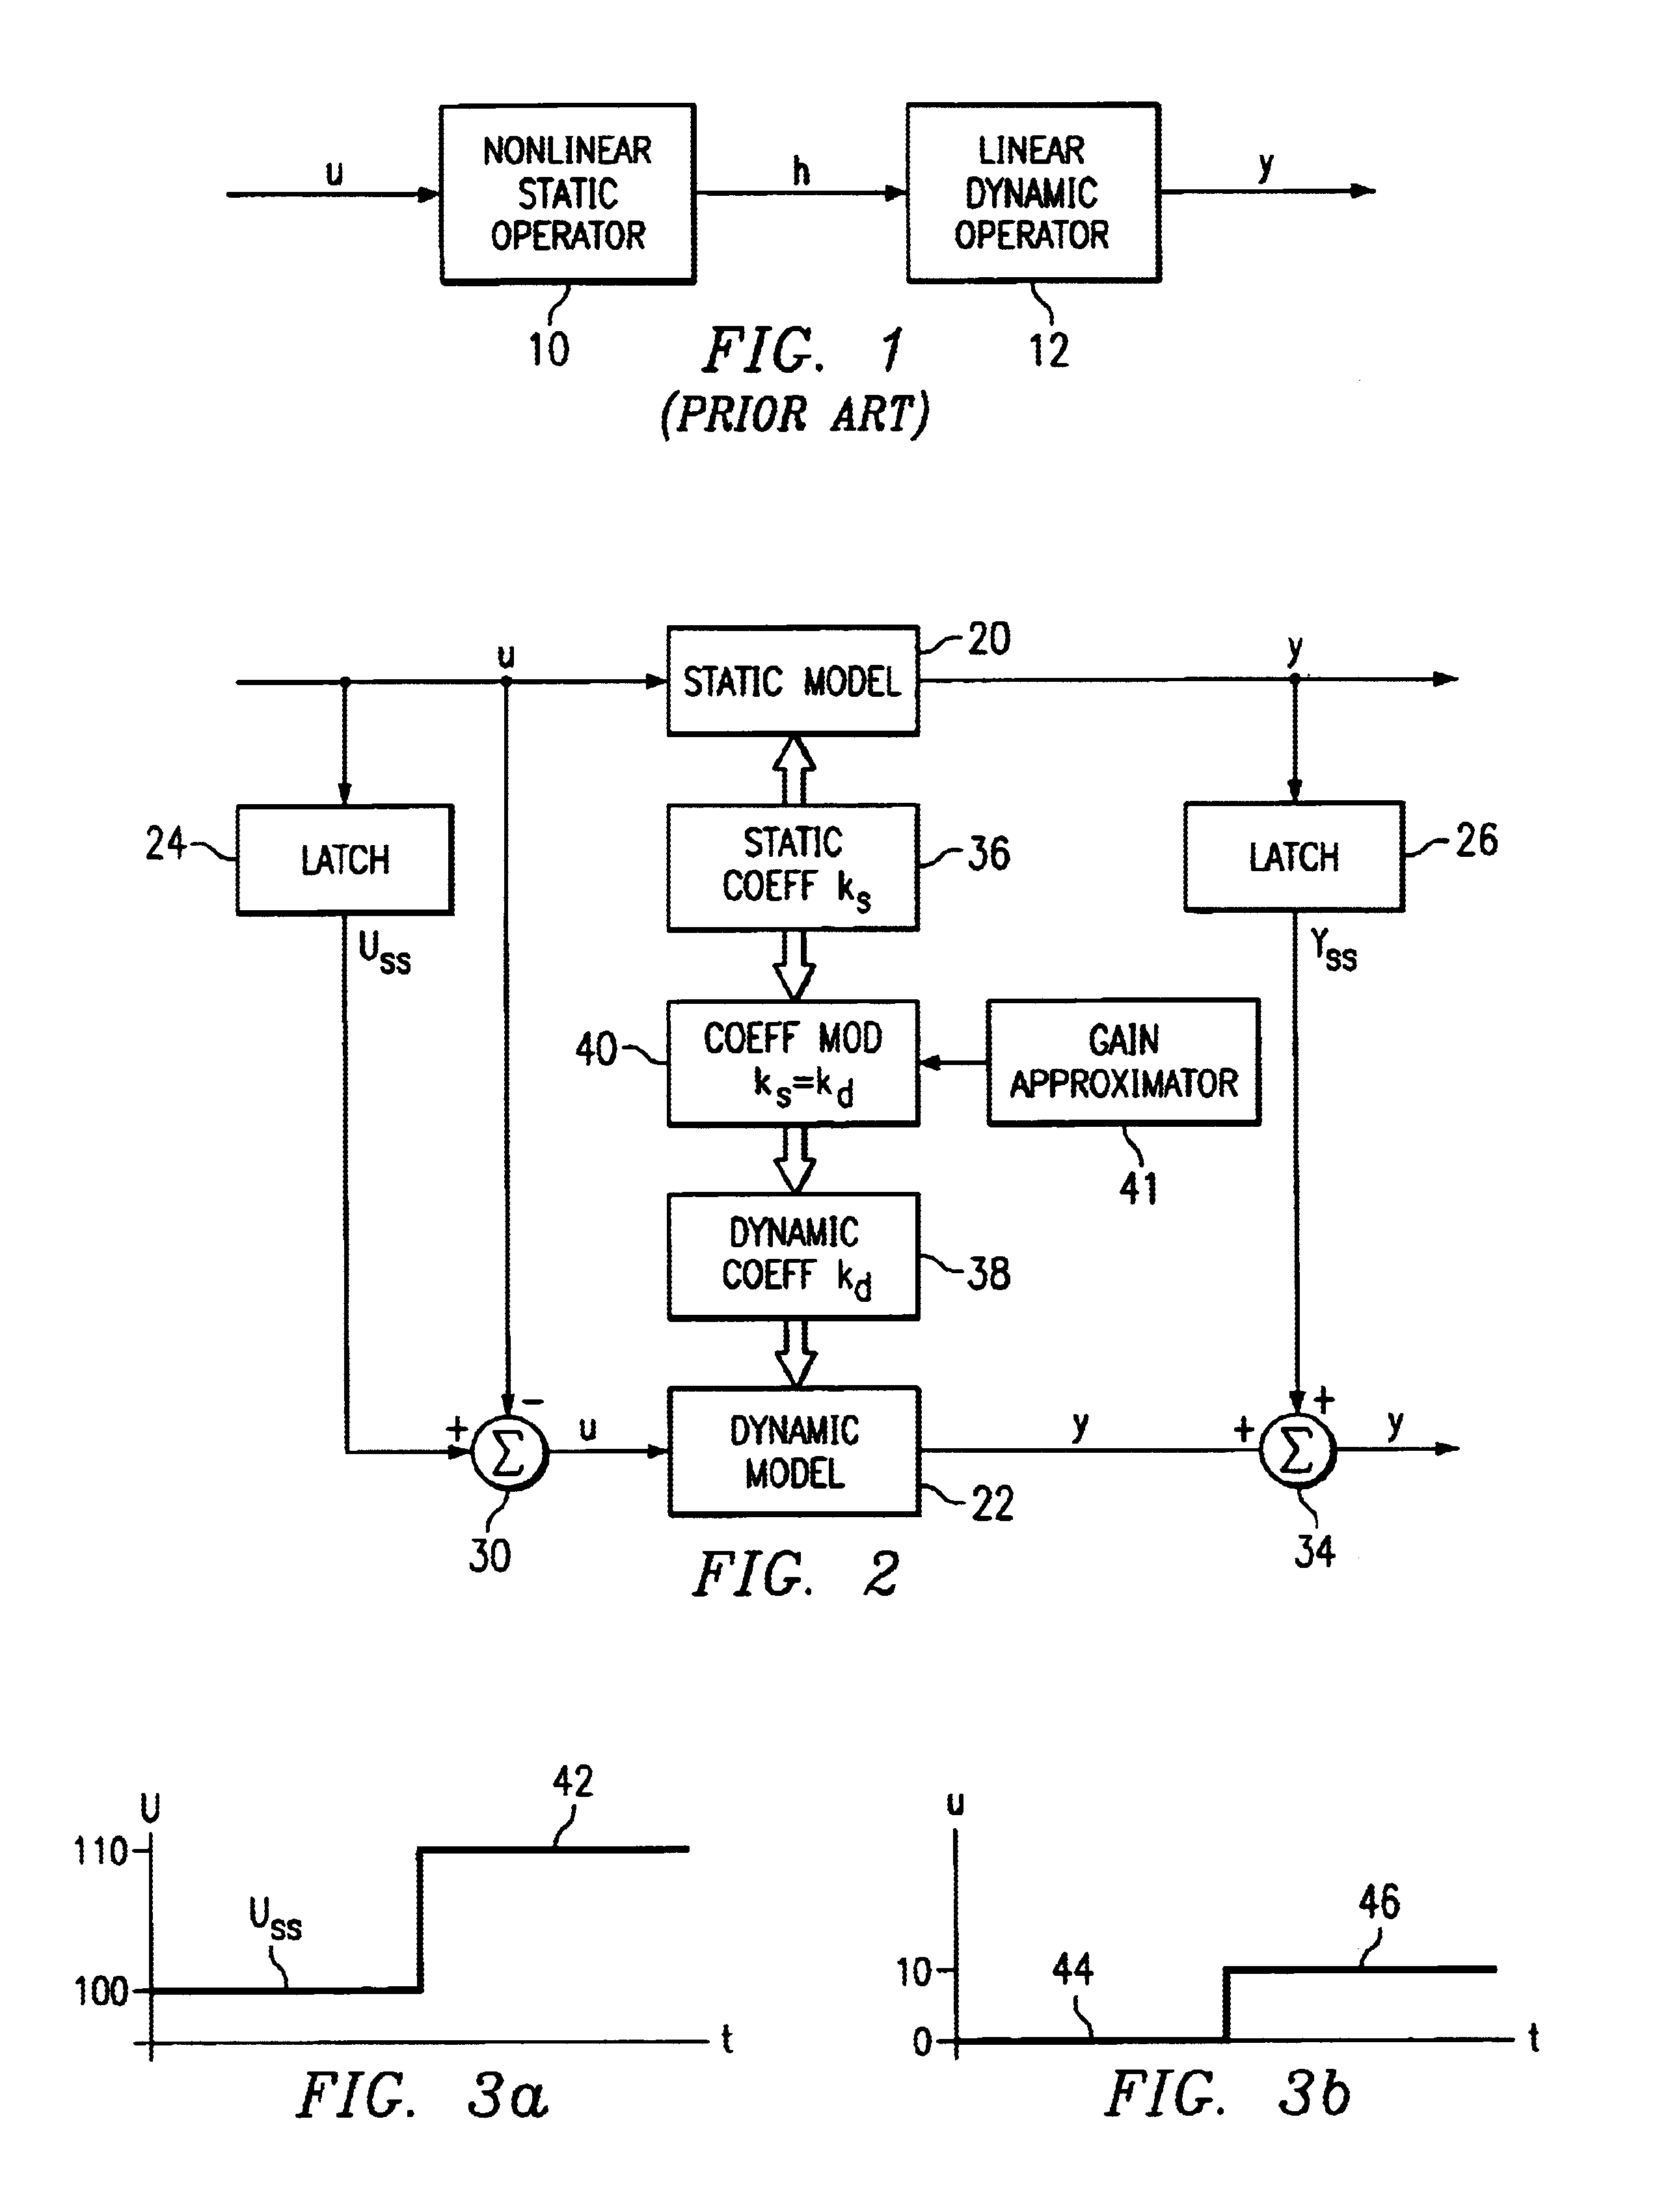 Method for optimizing a plant with multiple inputs